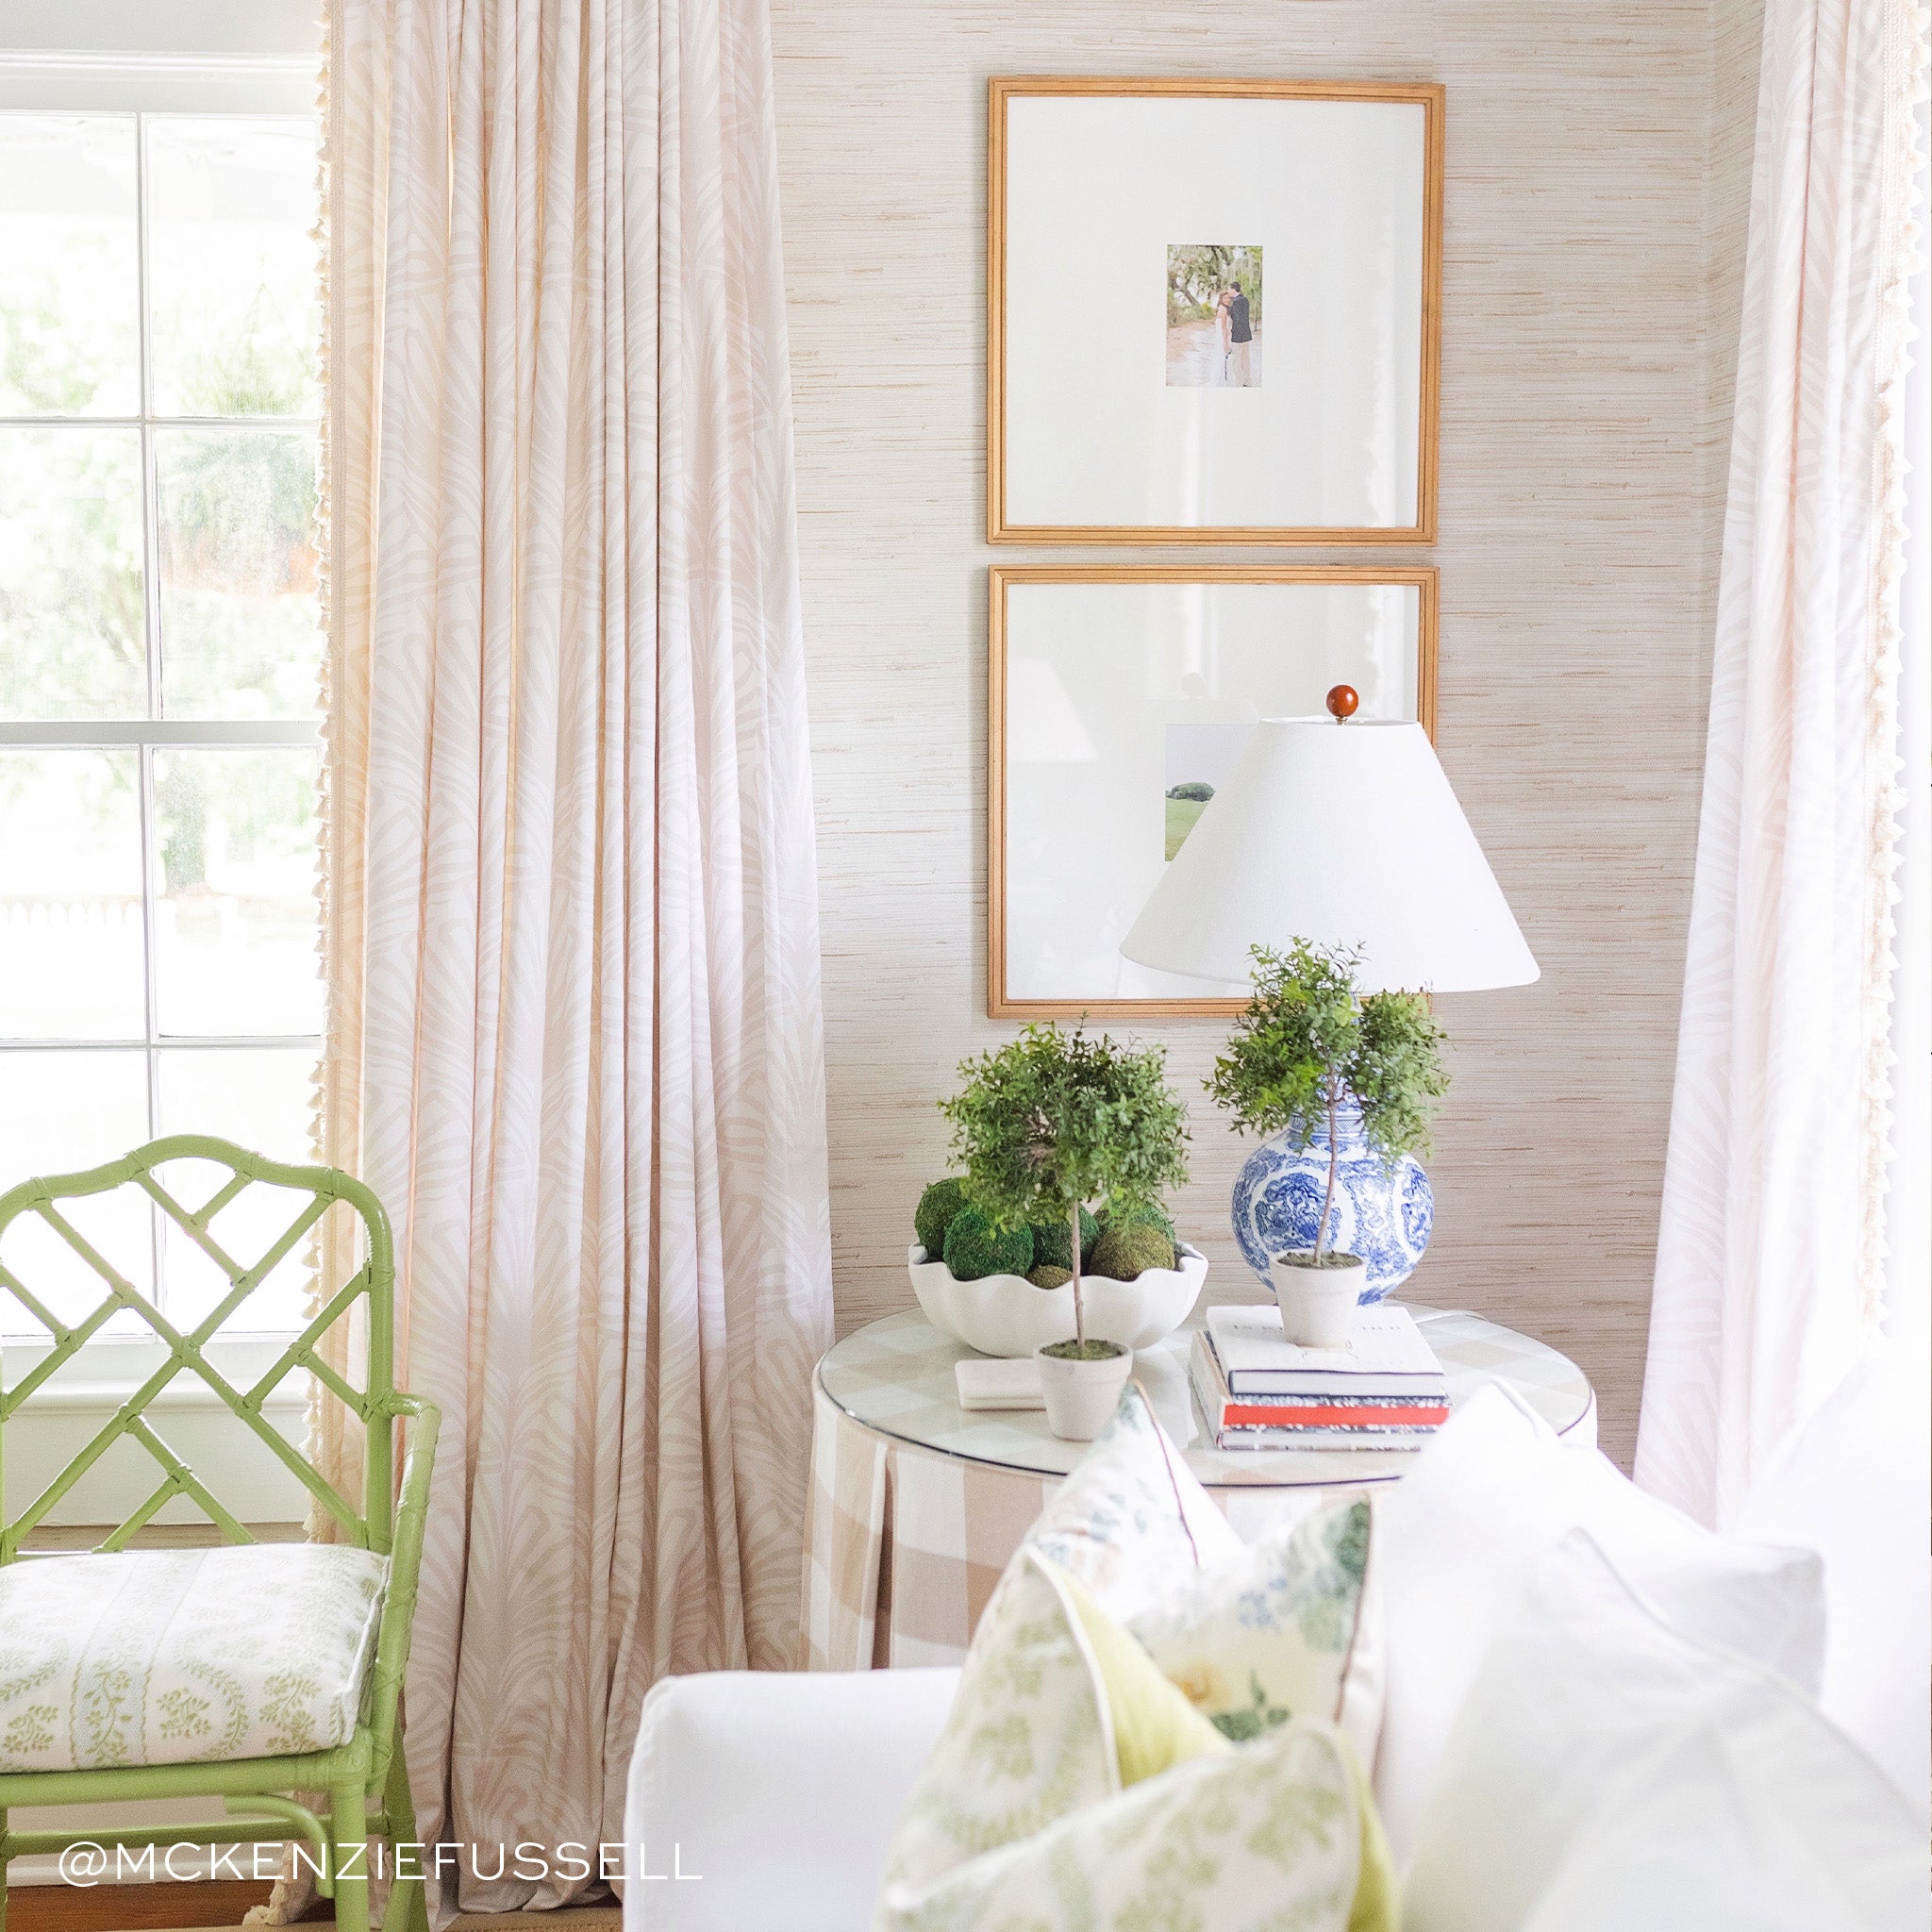 Living room corner styled with Beige Palm printed curtains on illuminated windows next to white couch and circular table with plants, books, and lamp on top. Photo taken by Mckenzie Fussell